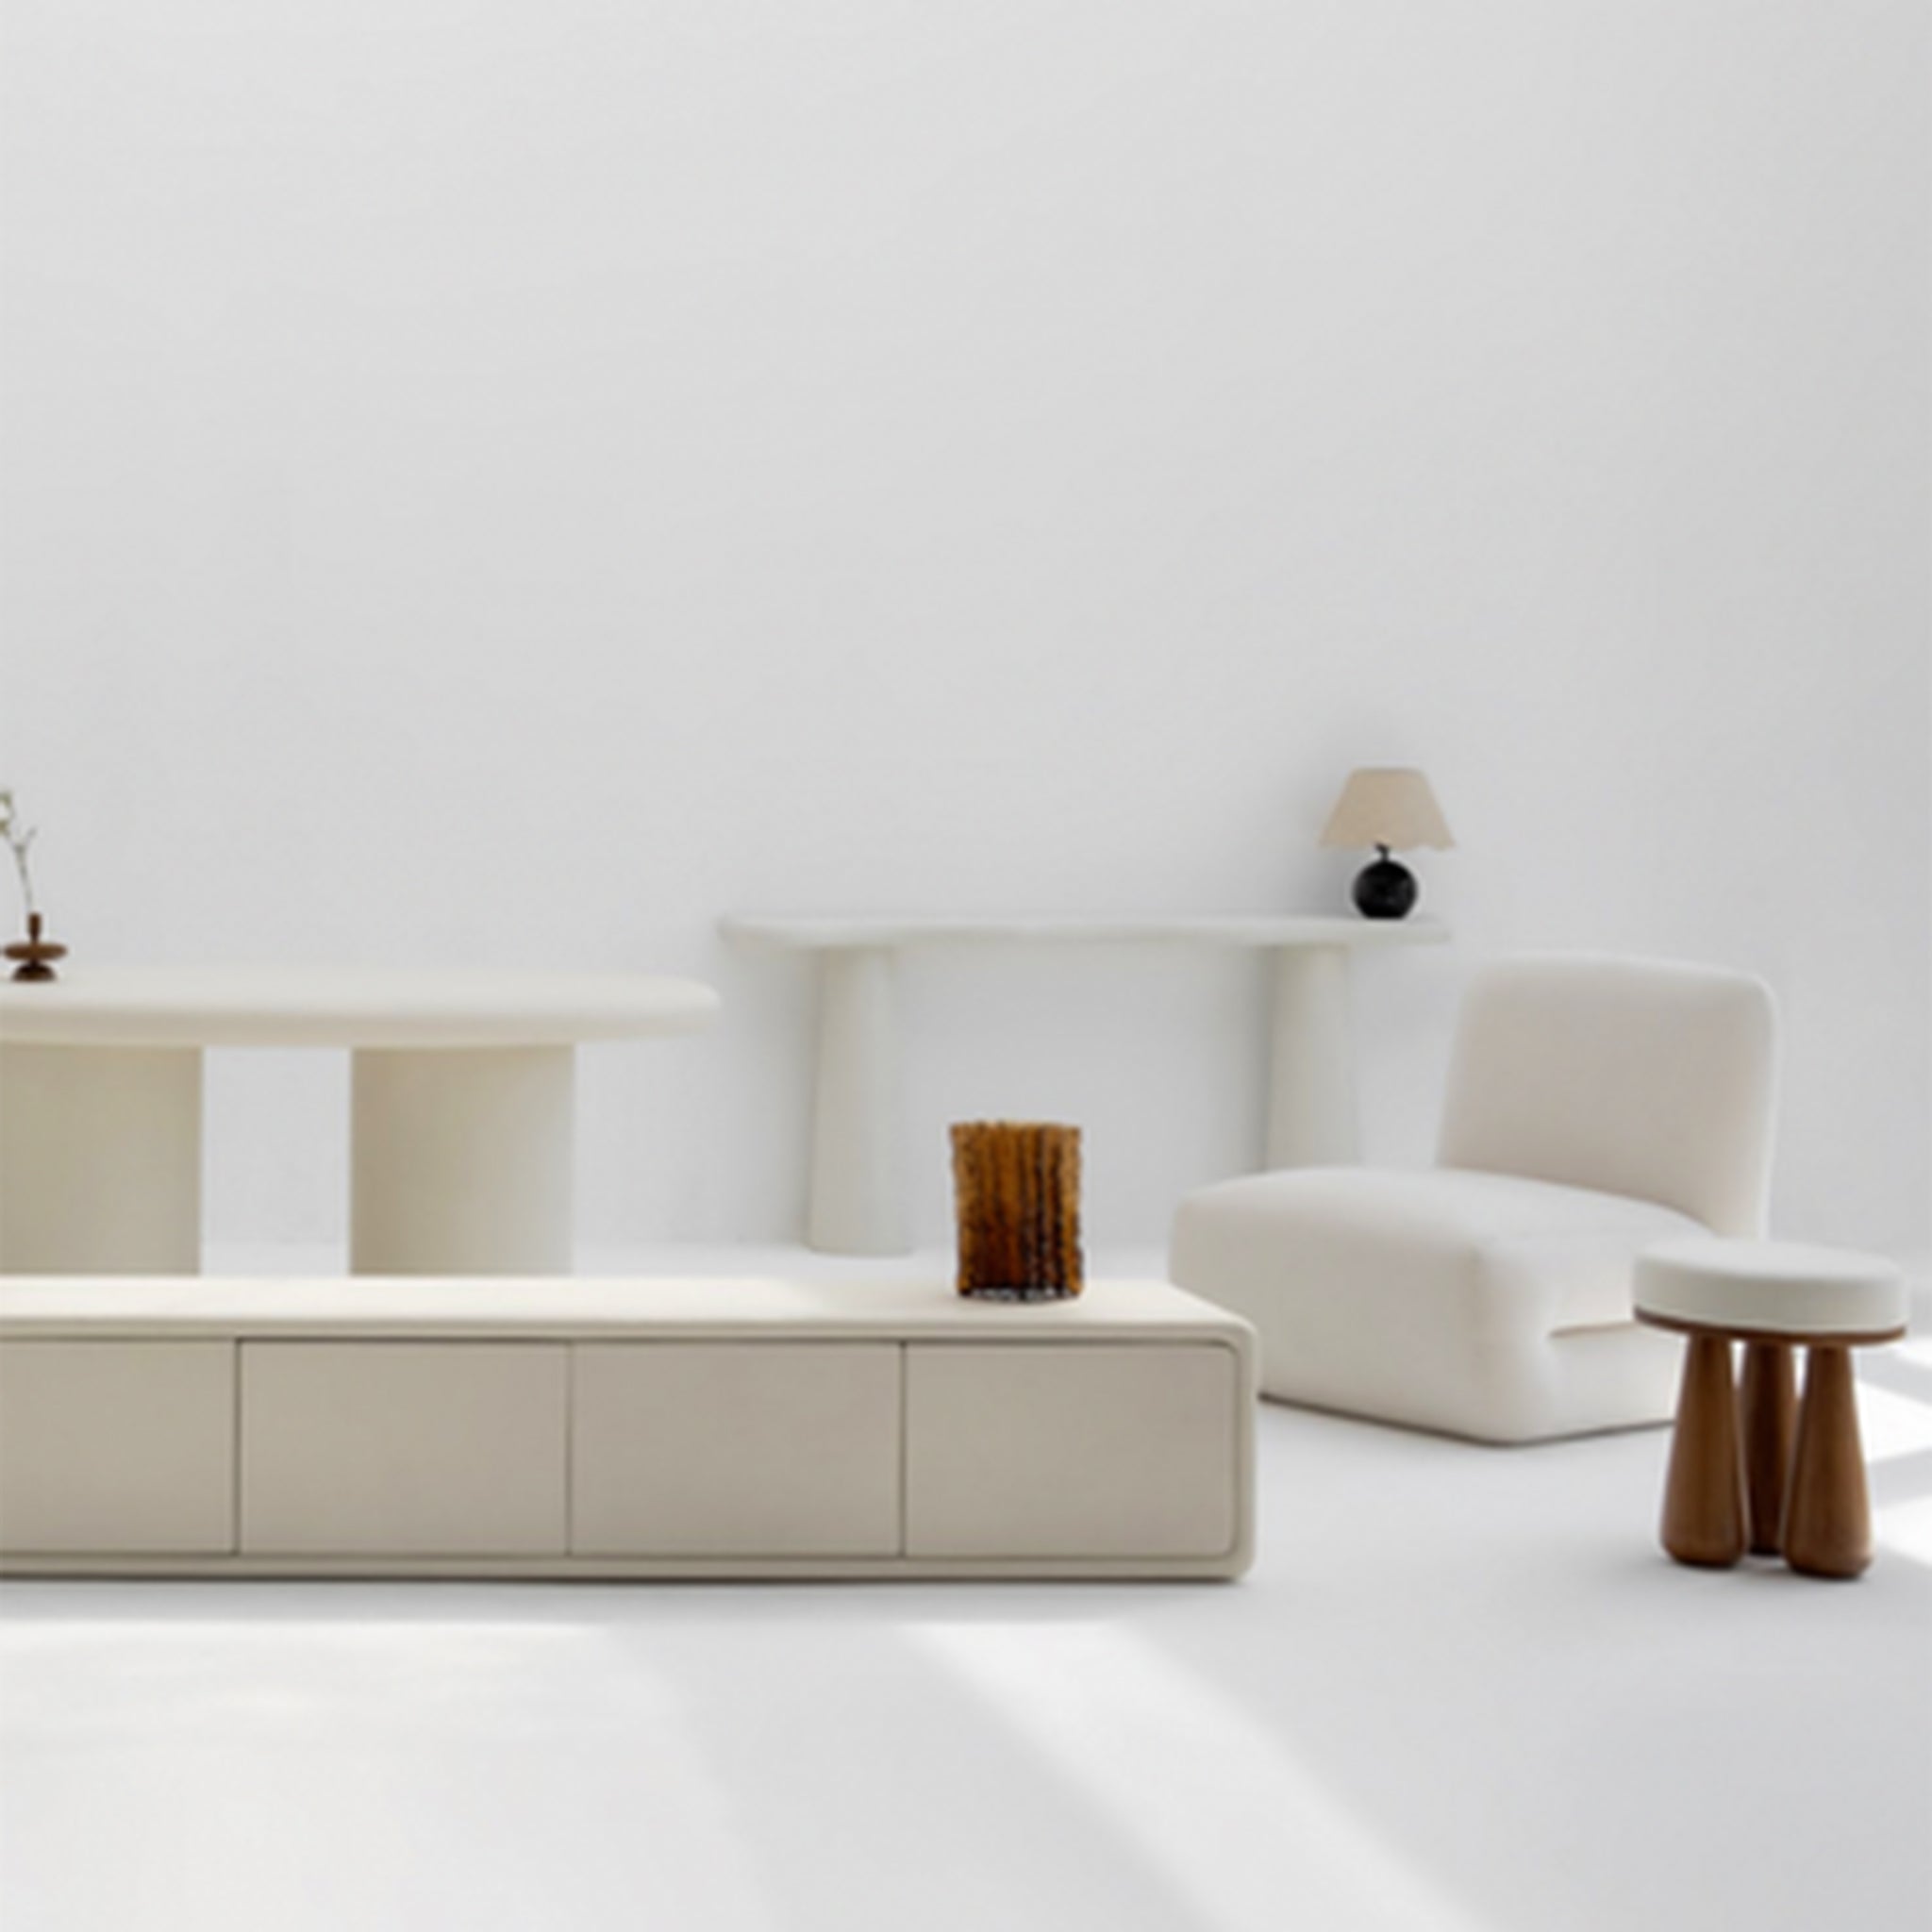 "Modern living room setup featuring The Alma Console in white with a sleek, contemporary look."